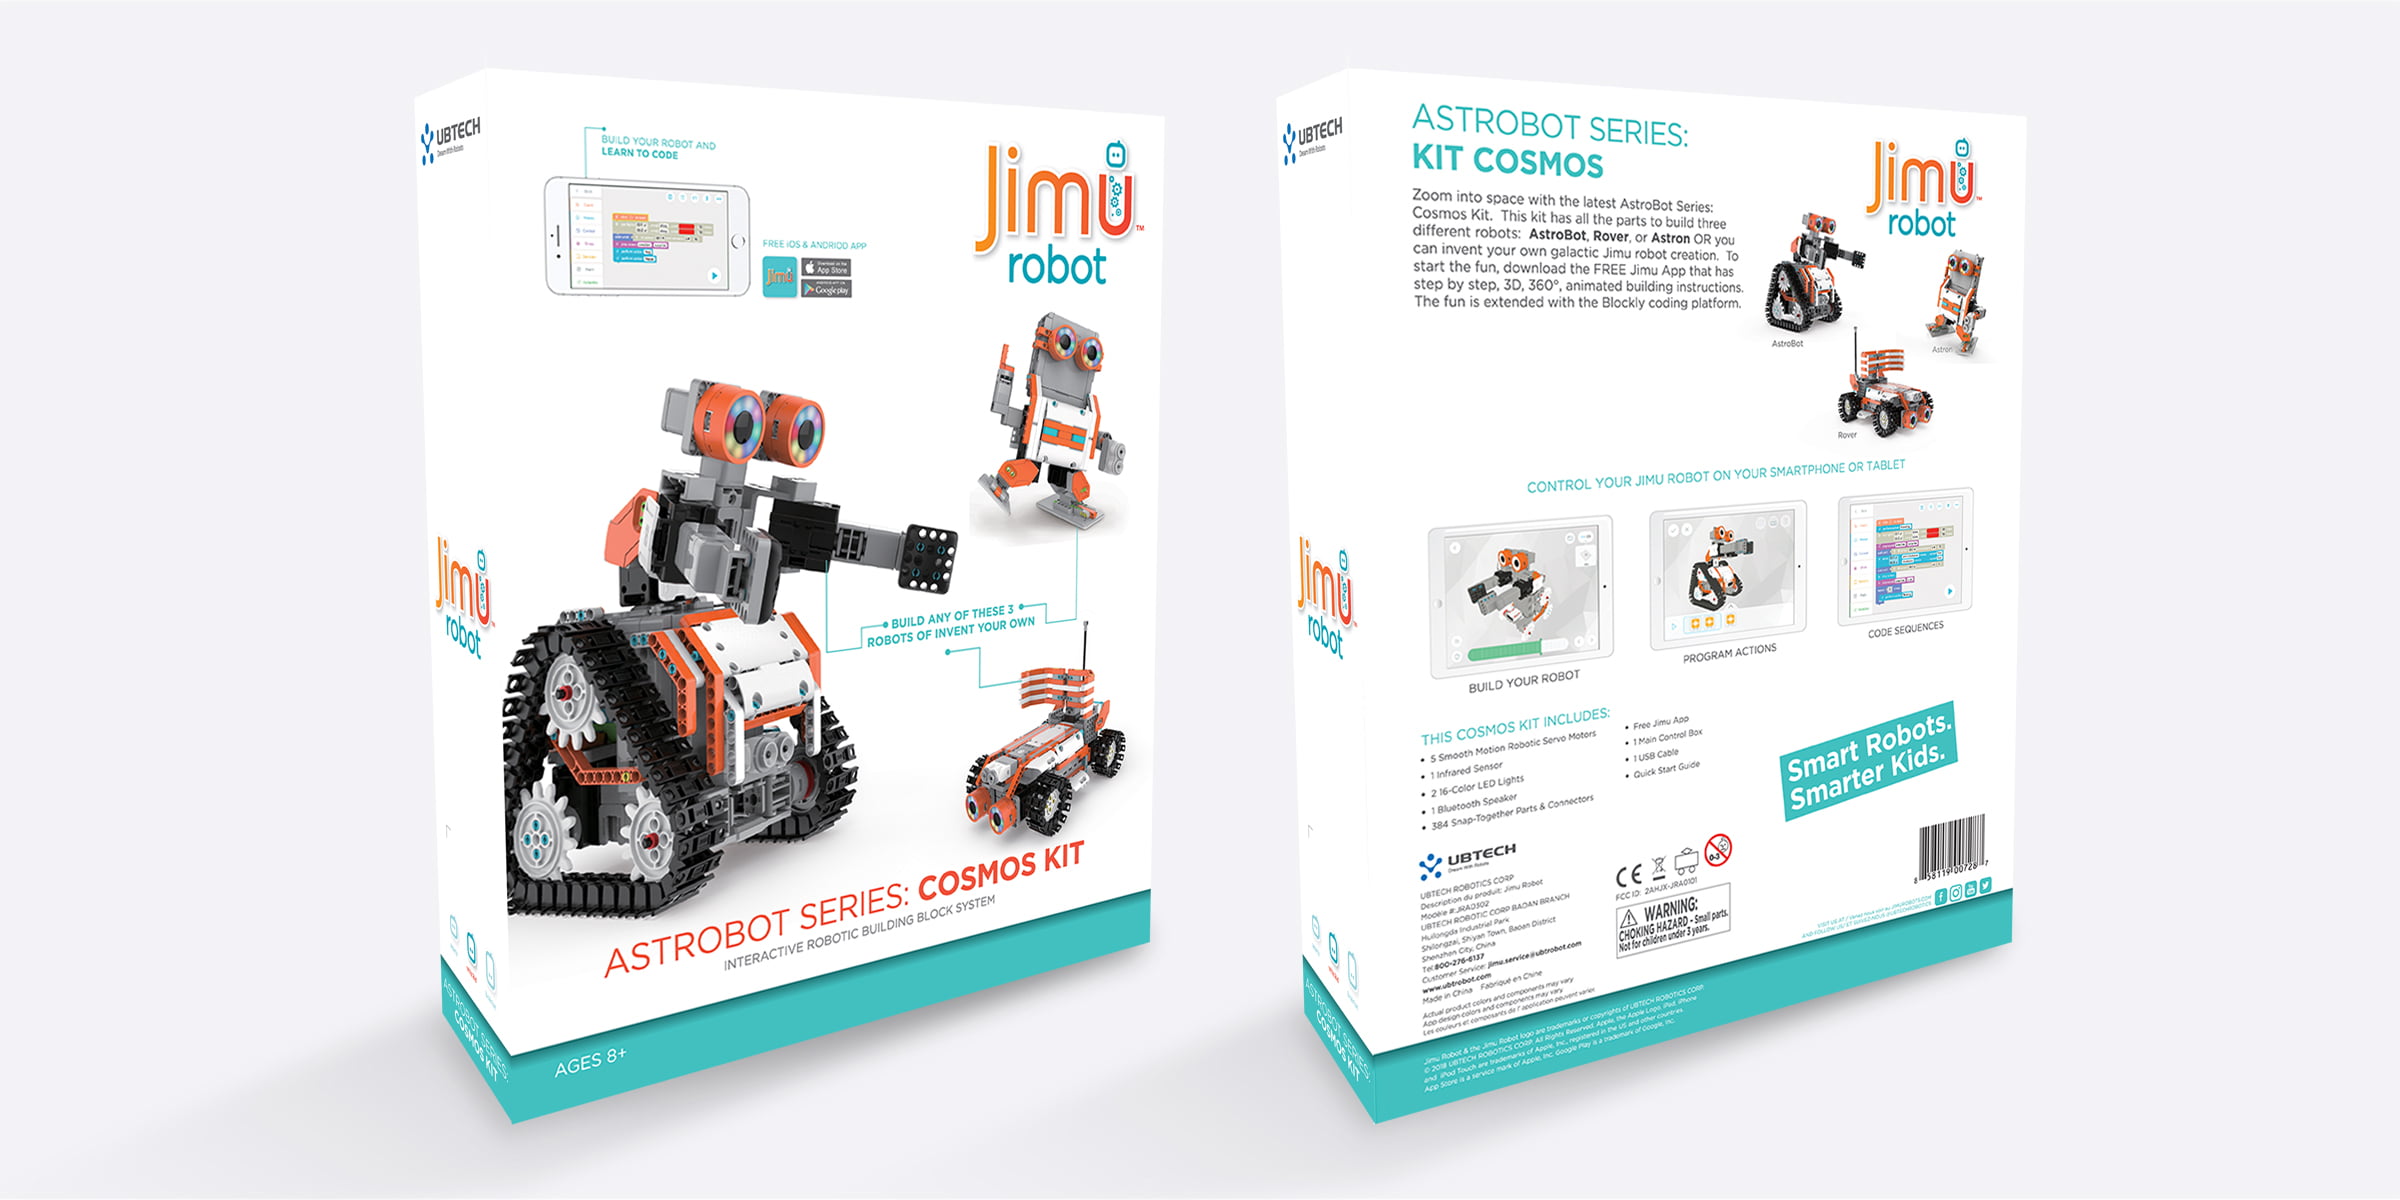 Cosmos Kit App-Enabled Building and Coding UBTECH JIMU Robot Astrobot Series 